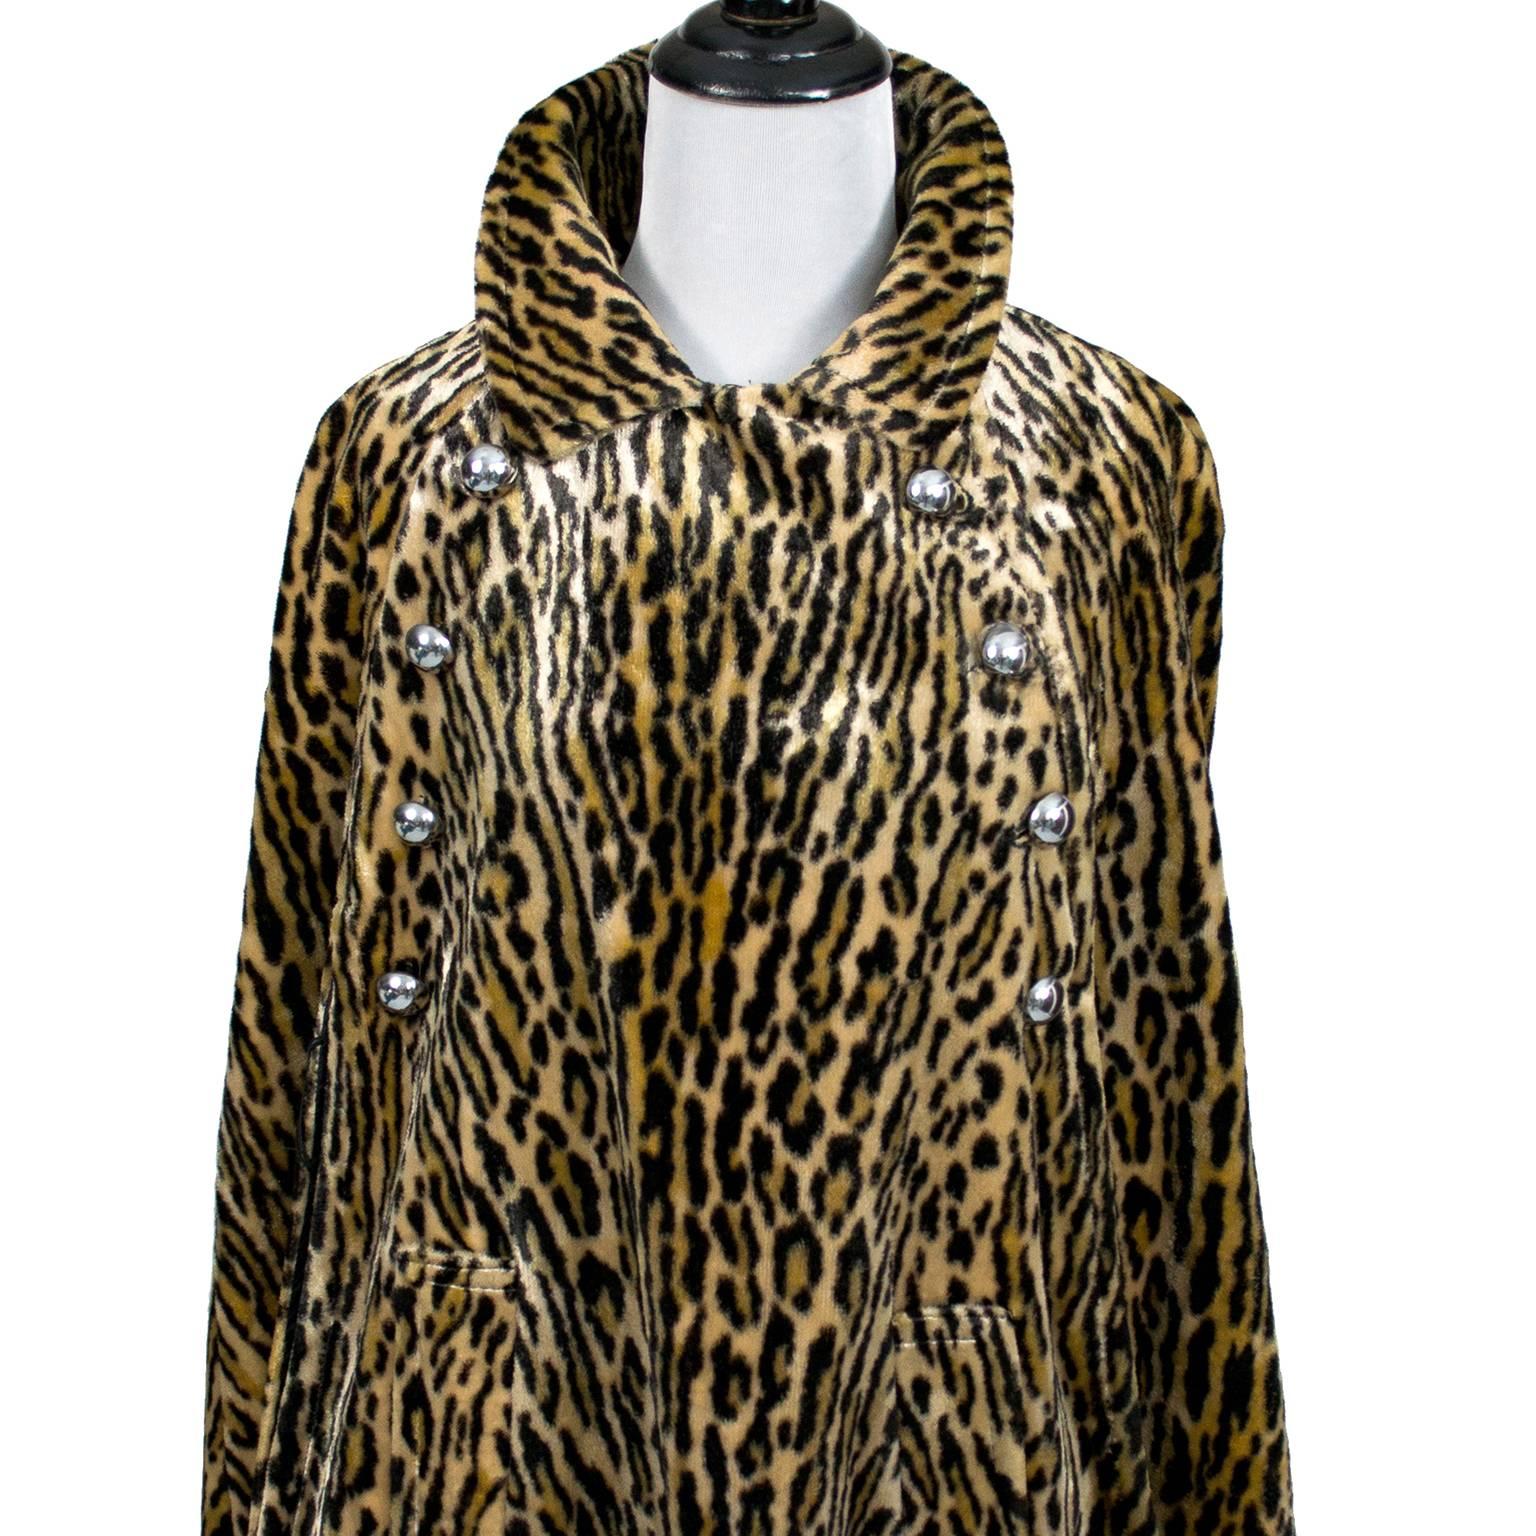 This vintage cape was purchased in the 1960's and is fully lined in brown satin.  The cape is made in a faux fur leopard animal print and has a label that reads:  Harolde's. This cape has big silver domed buttons and side slit pockets. This fits